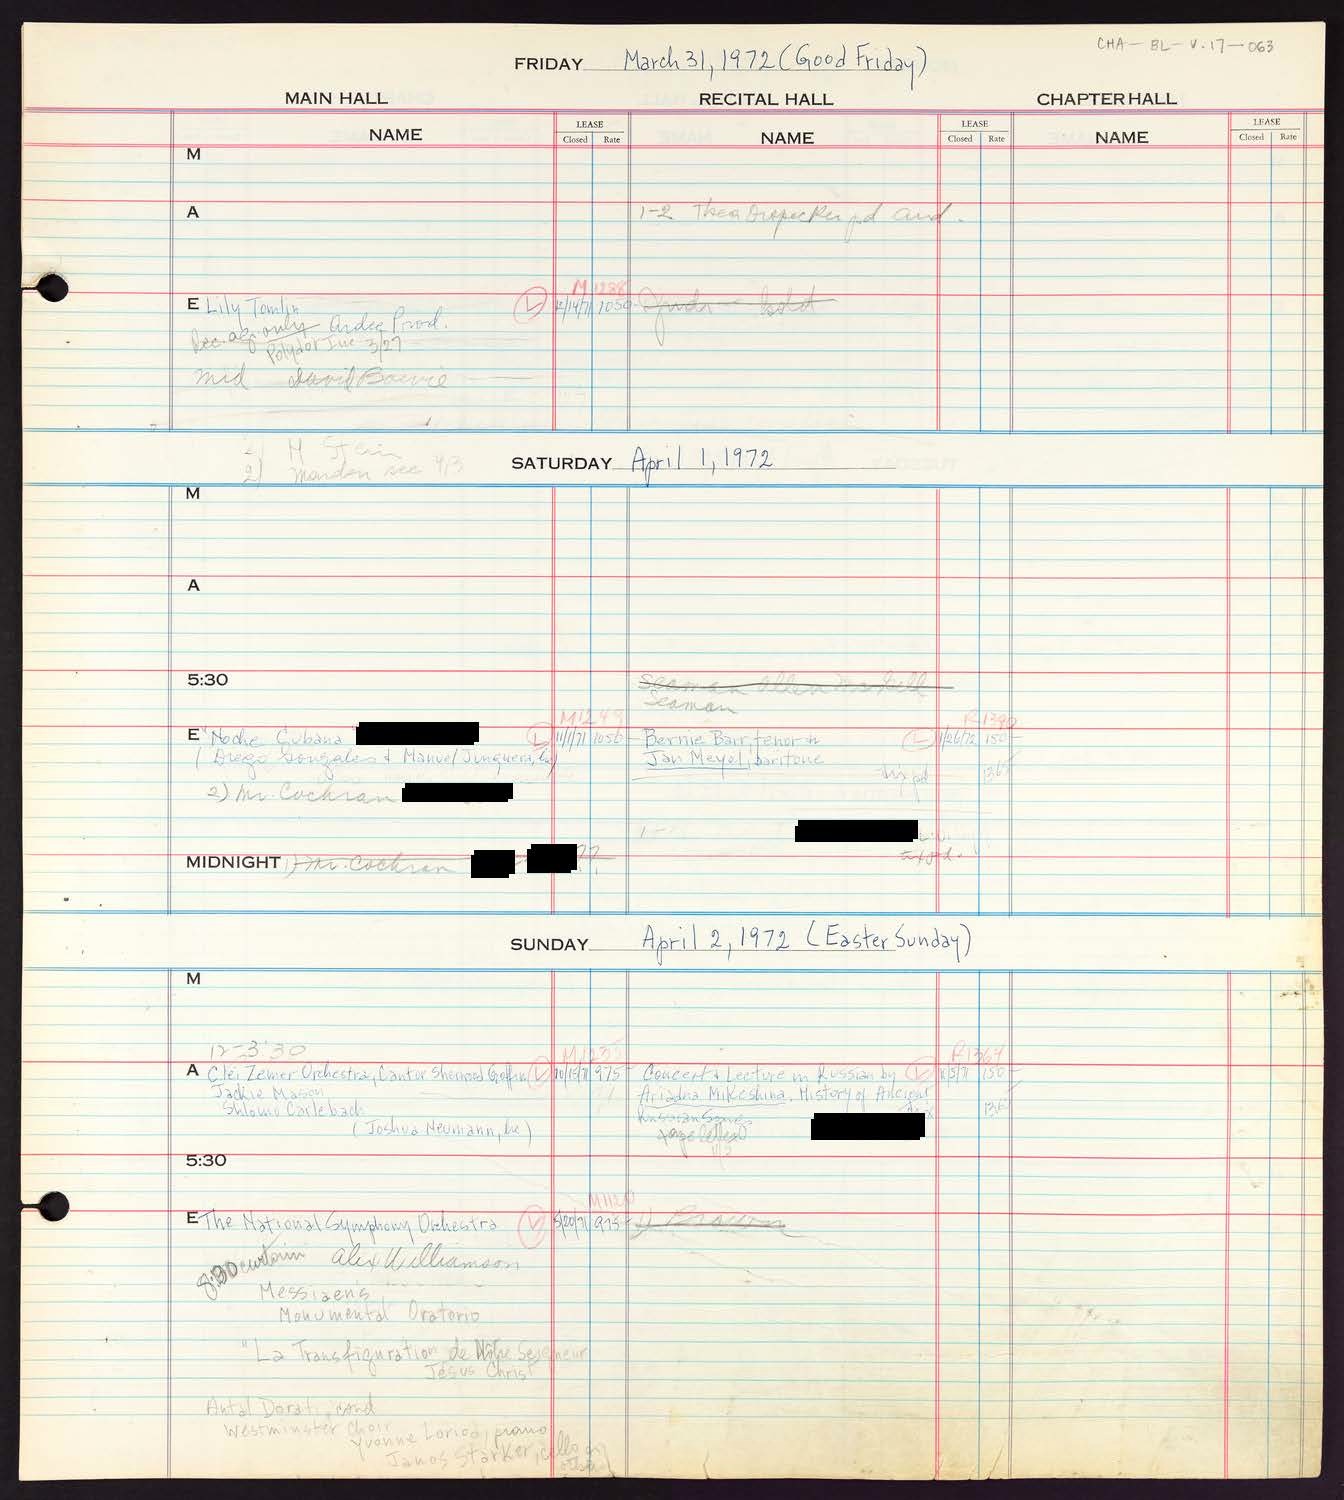 Carnegie Hall Booking Ledger, volume 17, page 63